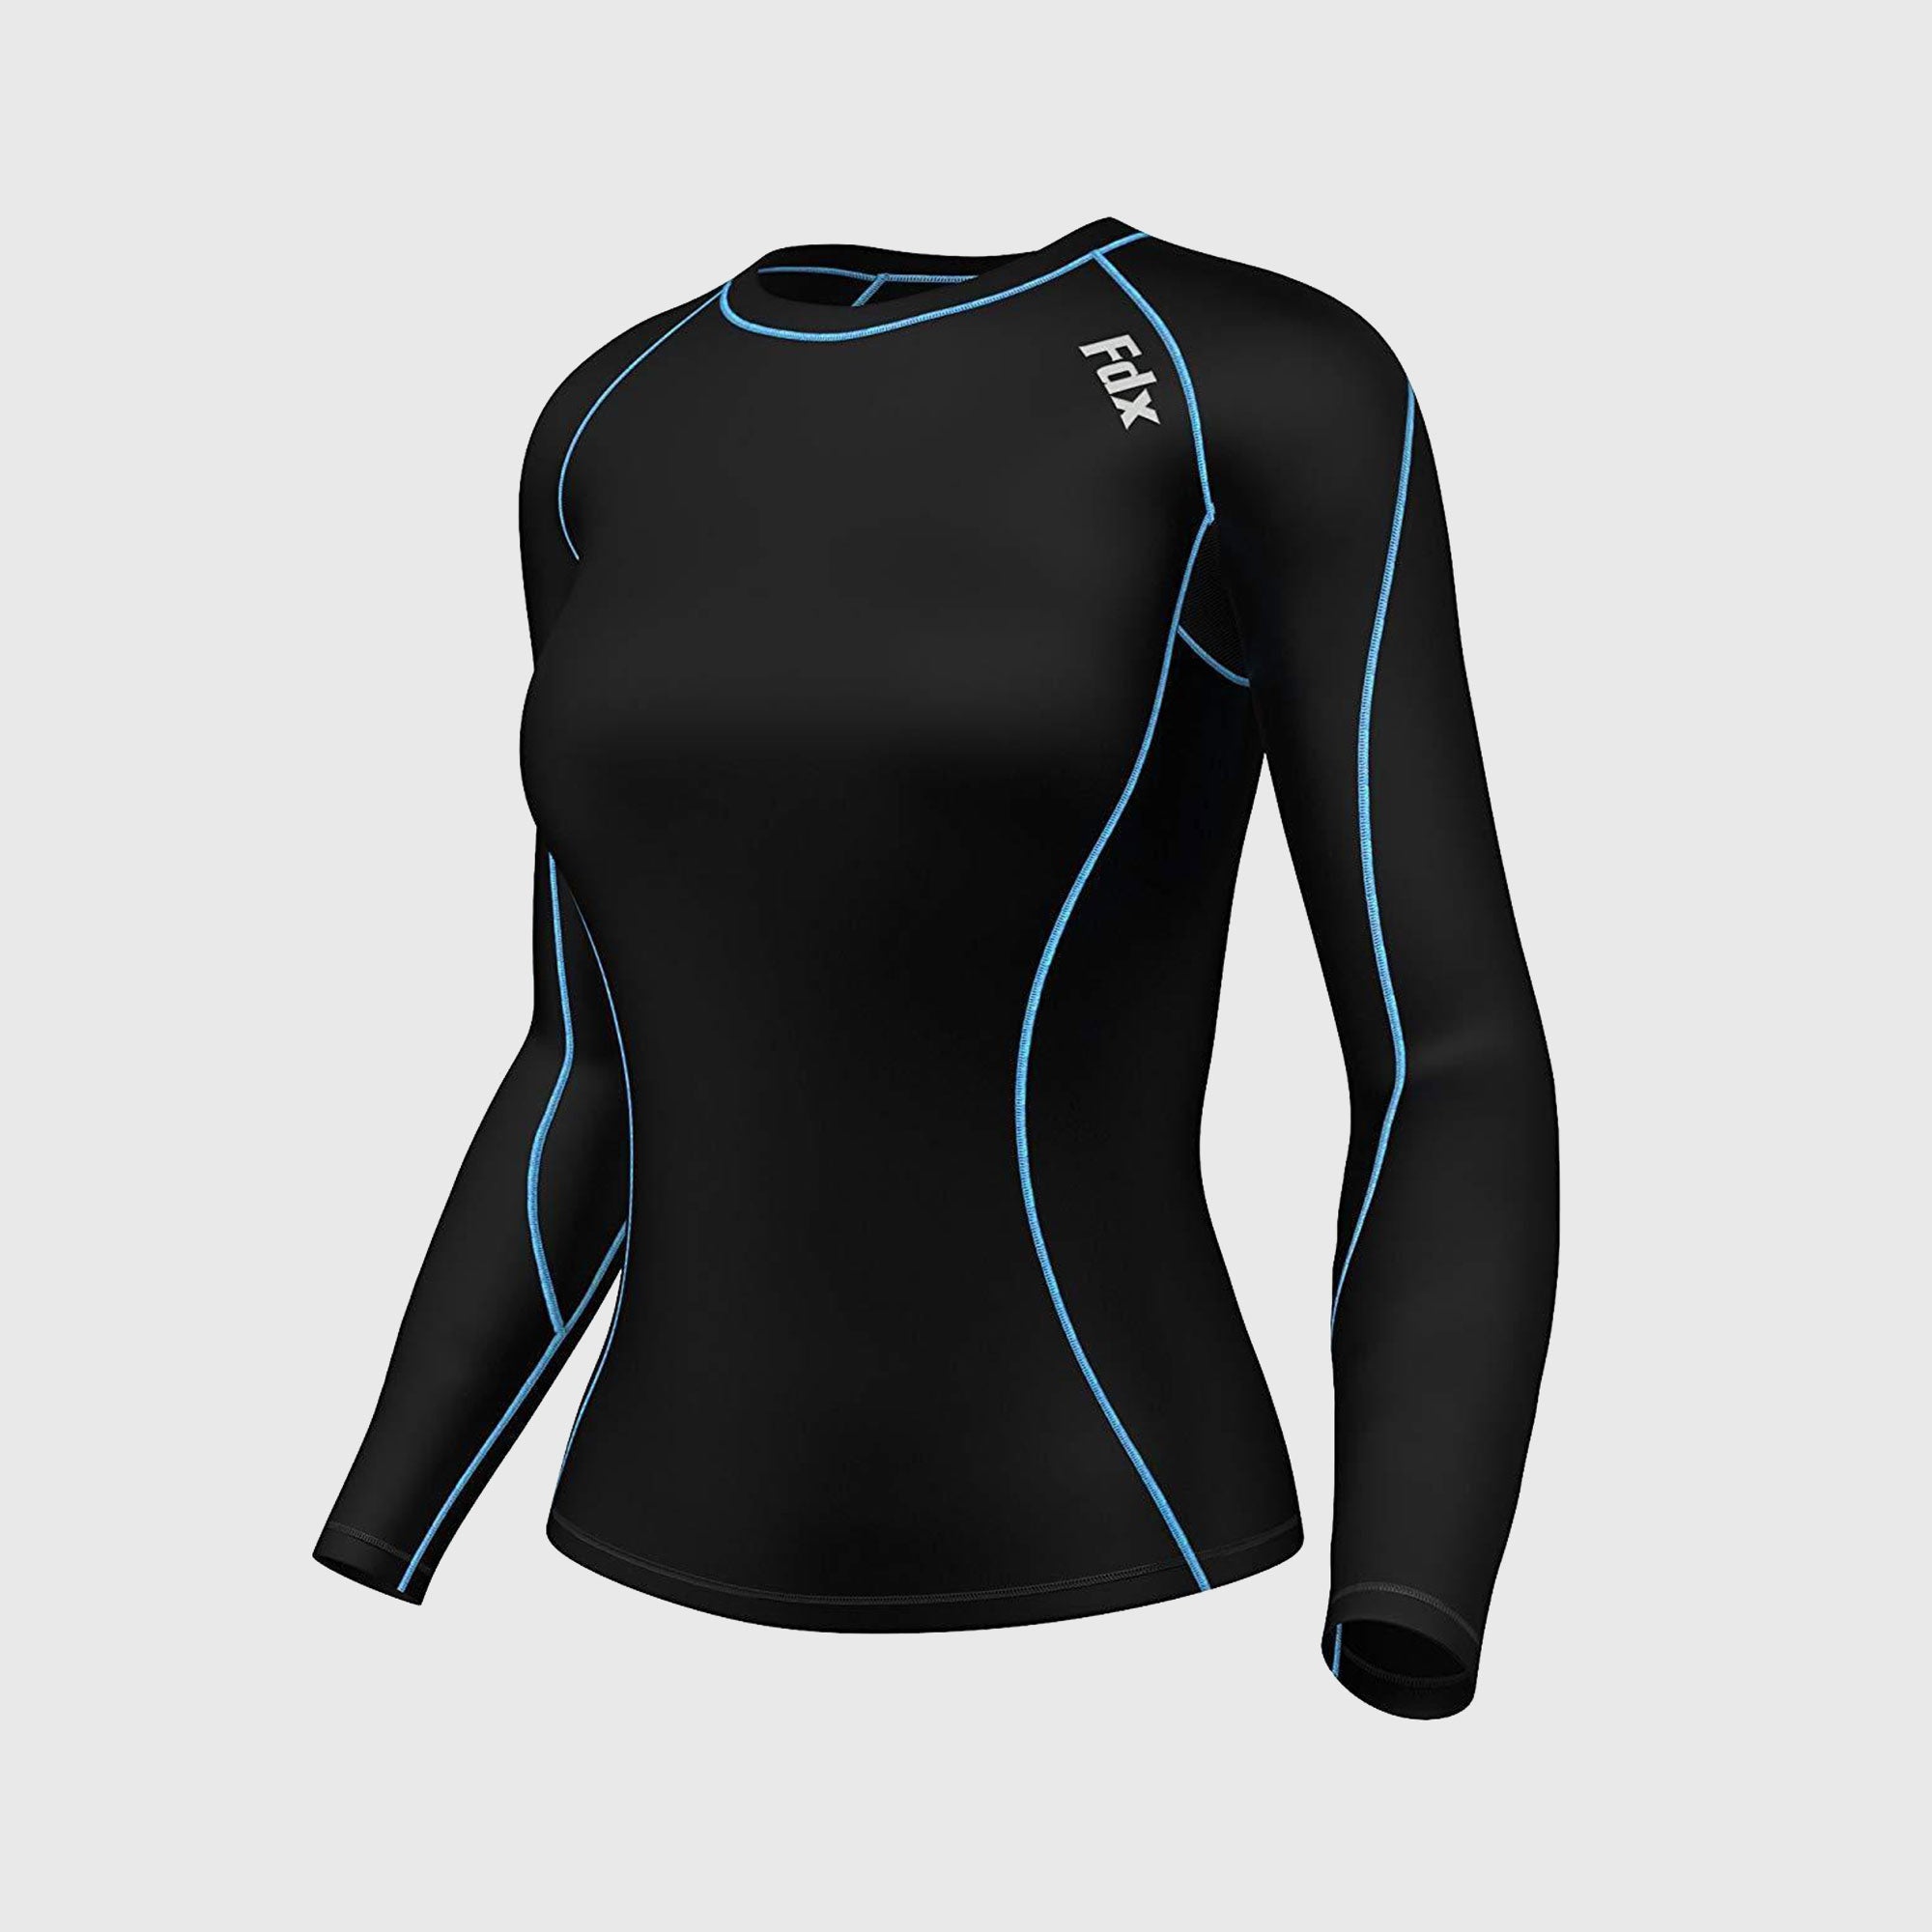 Fdx Women's Black & Sky Blue Long Sleeve Compression Top & Compression Tights Base Layer Gym Training Jogging Yoga Fitness Body Wear - Monarch